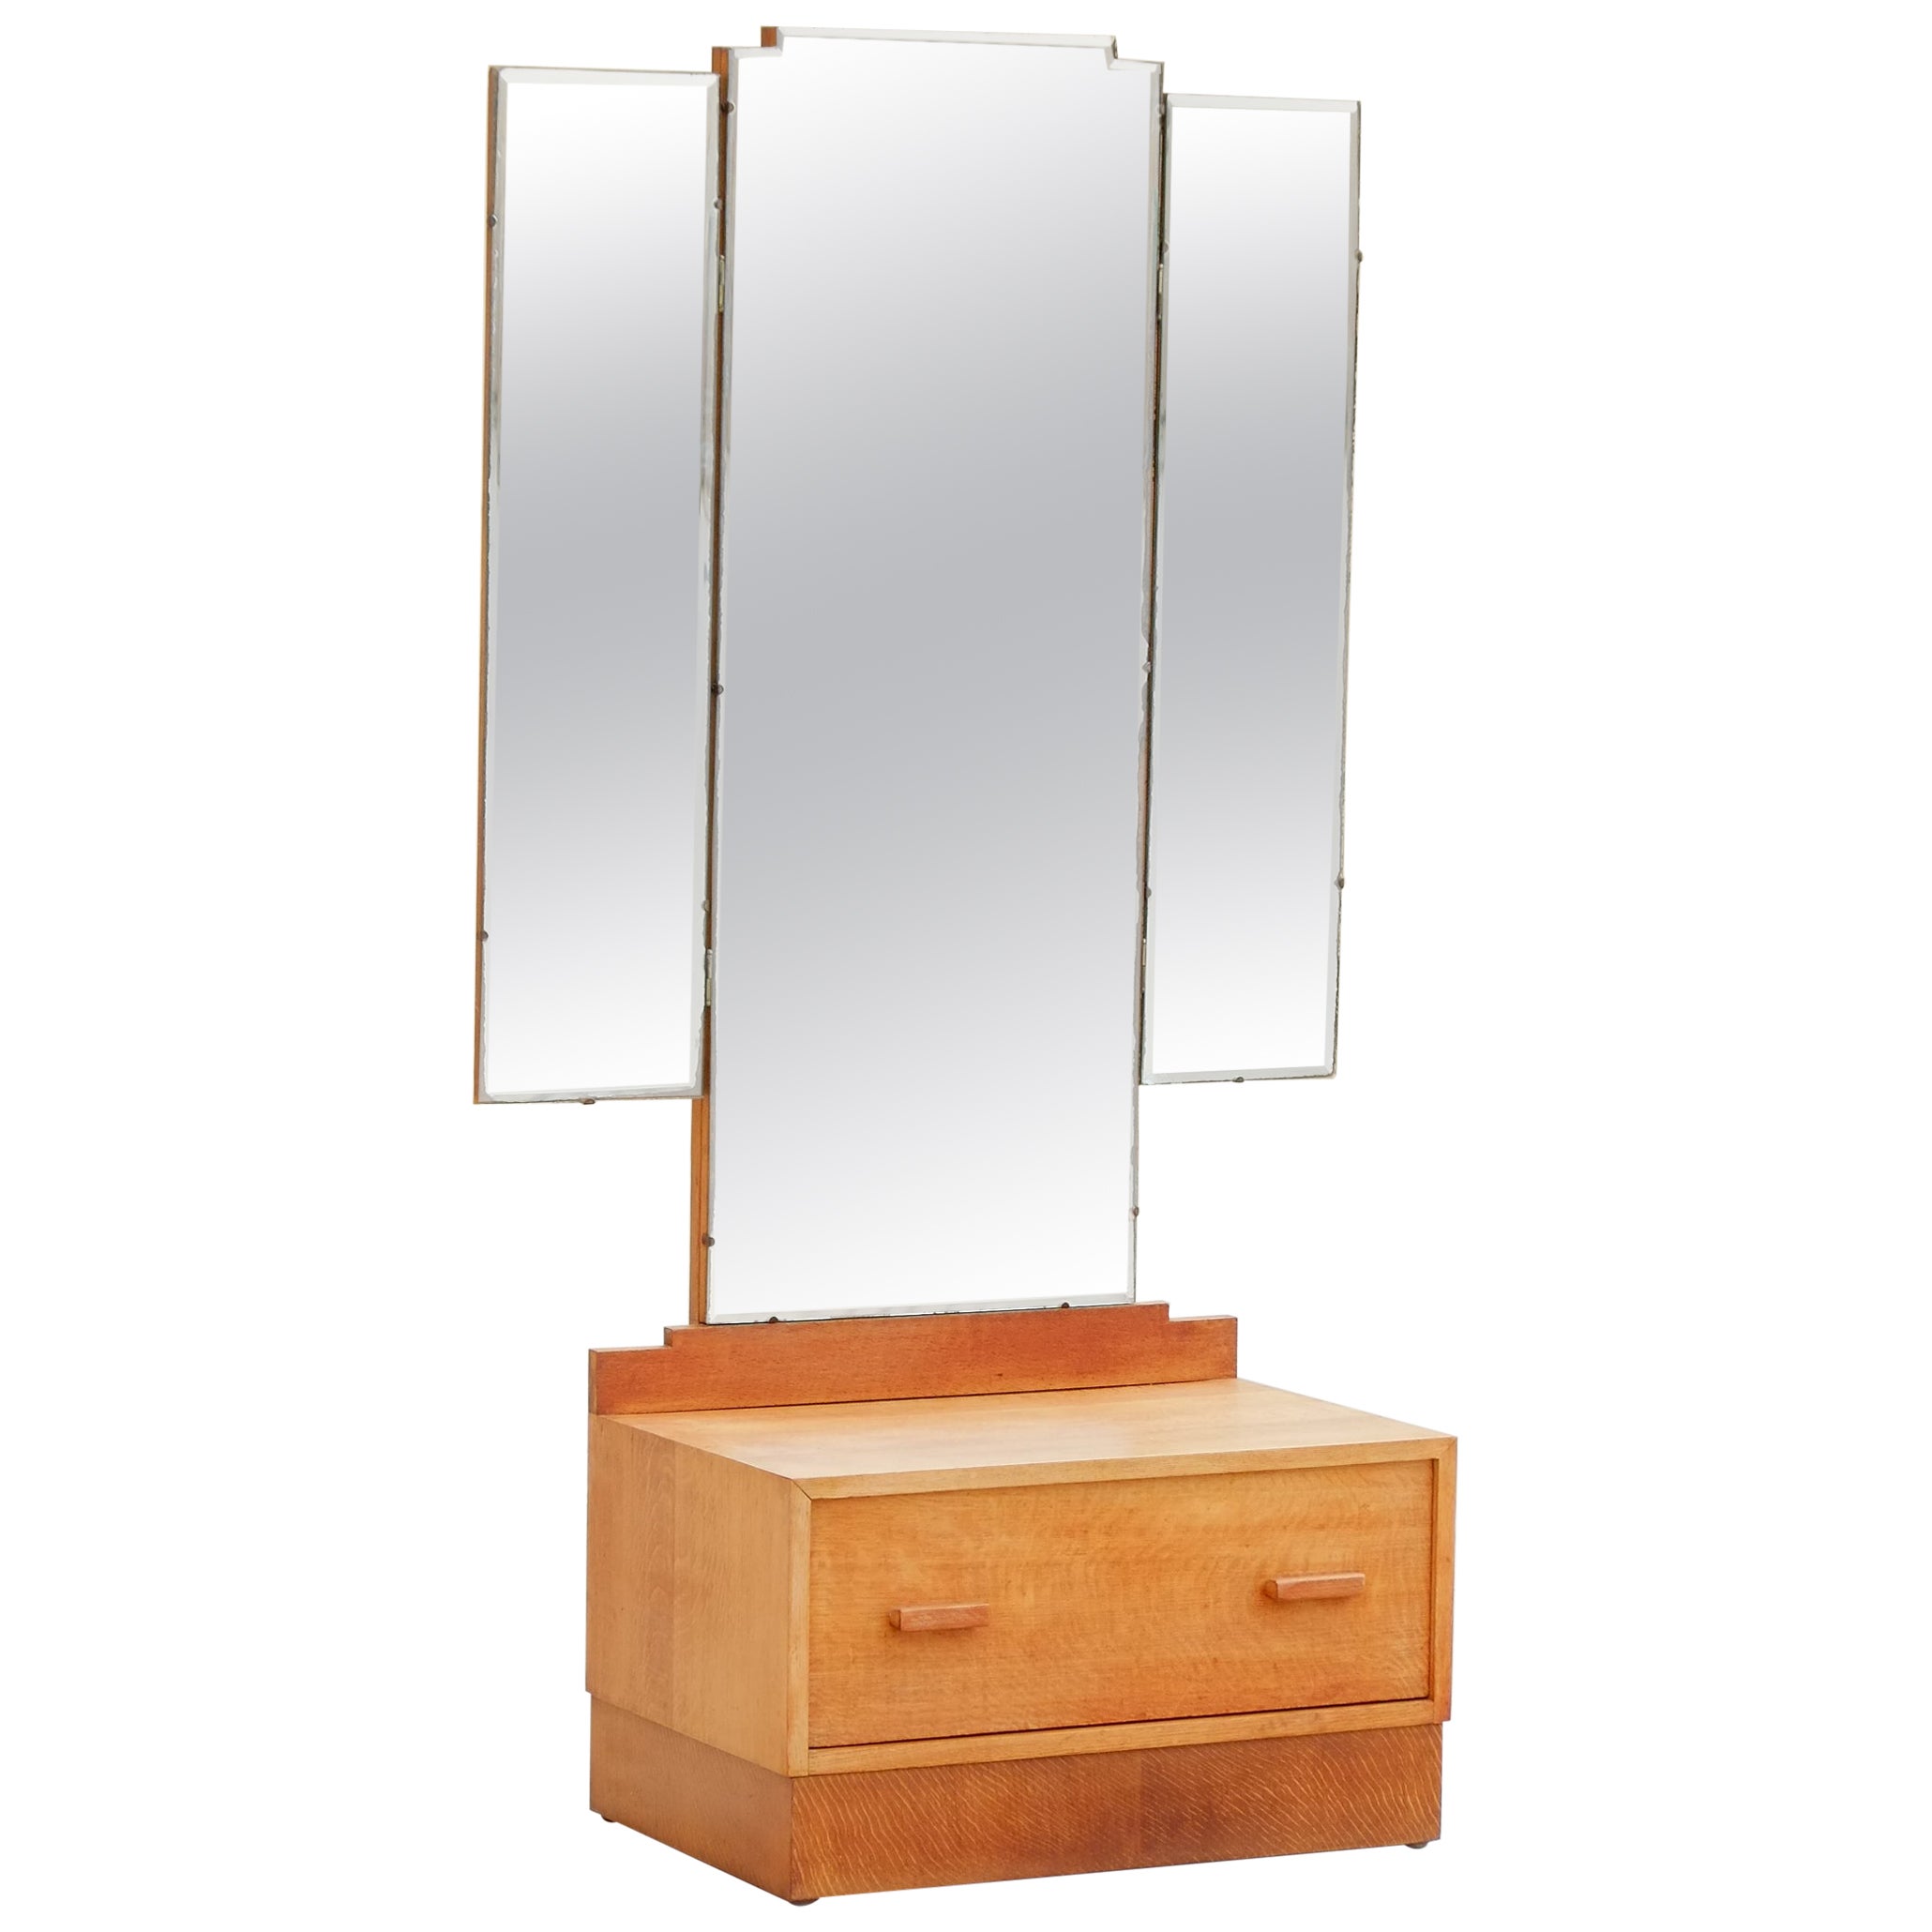 English Art Deco 1930s Solid Oak Triple Dressing Mirror with Drawer